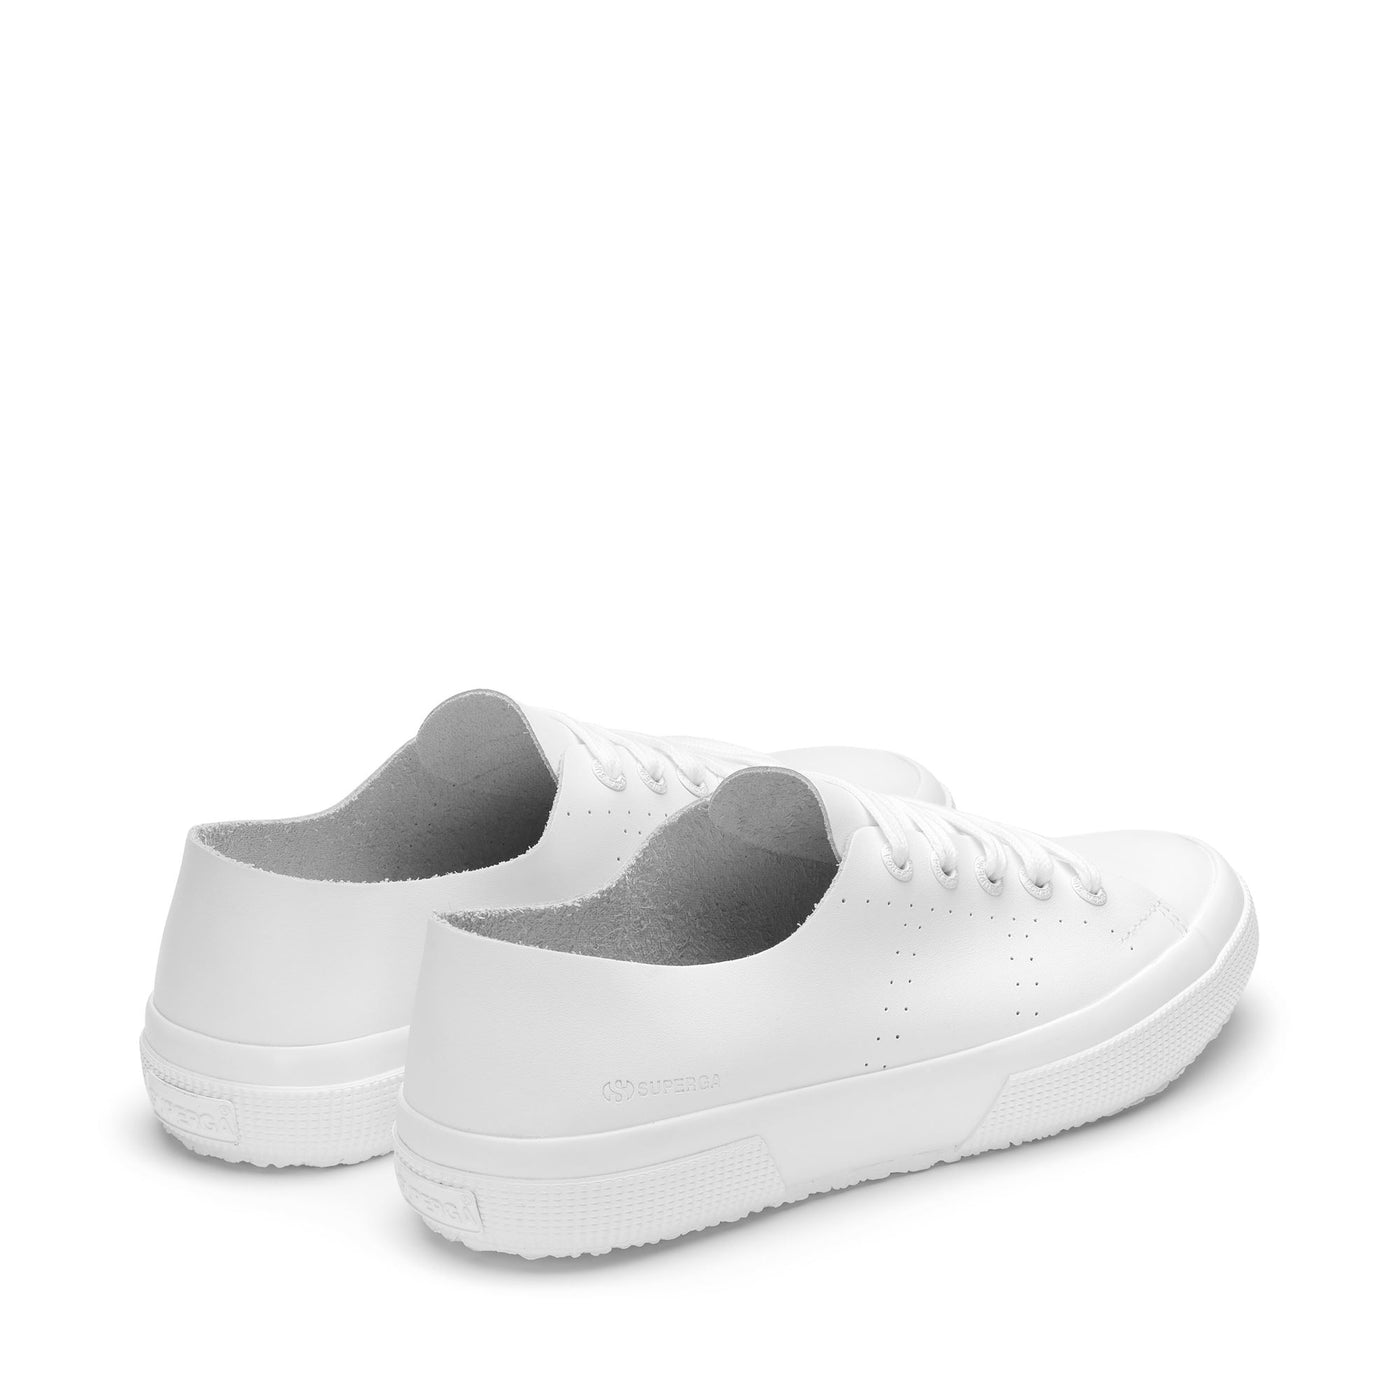 Le Superga Unisex 2750 MORPHING MULE LEATHER Low Cut TOTAL WHITE Dressed Side (jpg Rgb)		